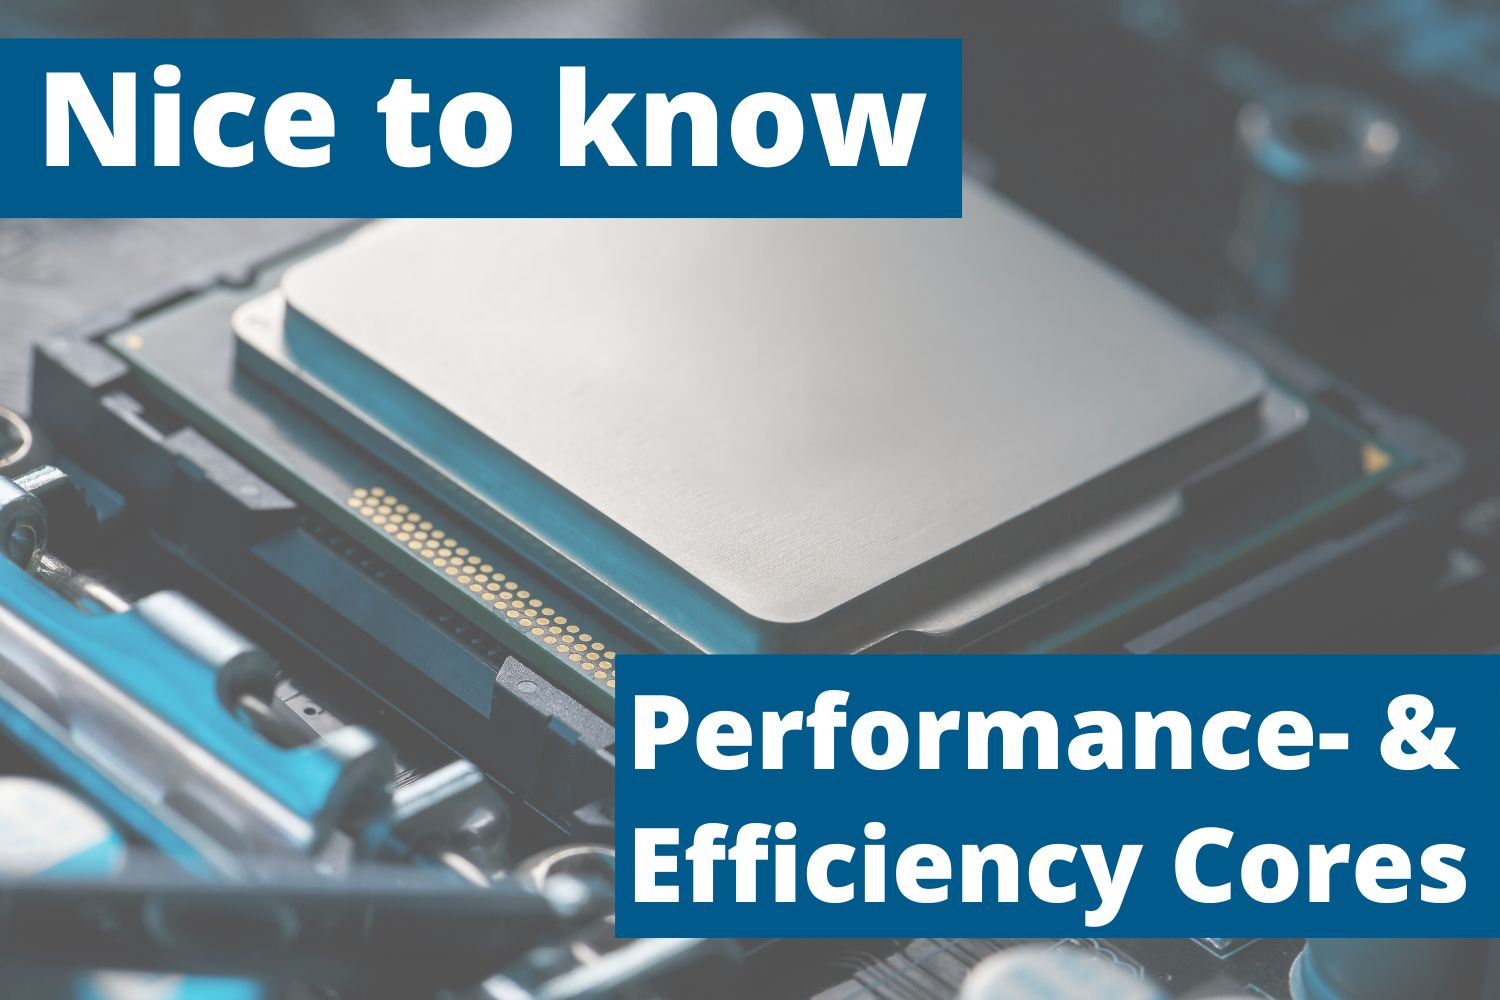 Nice to know: Intel Performance Cores and Efficiency Cores